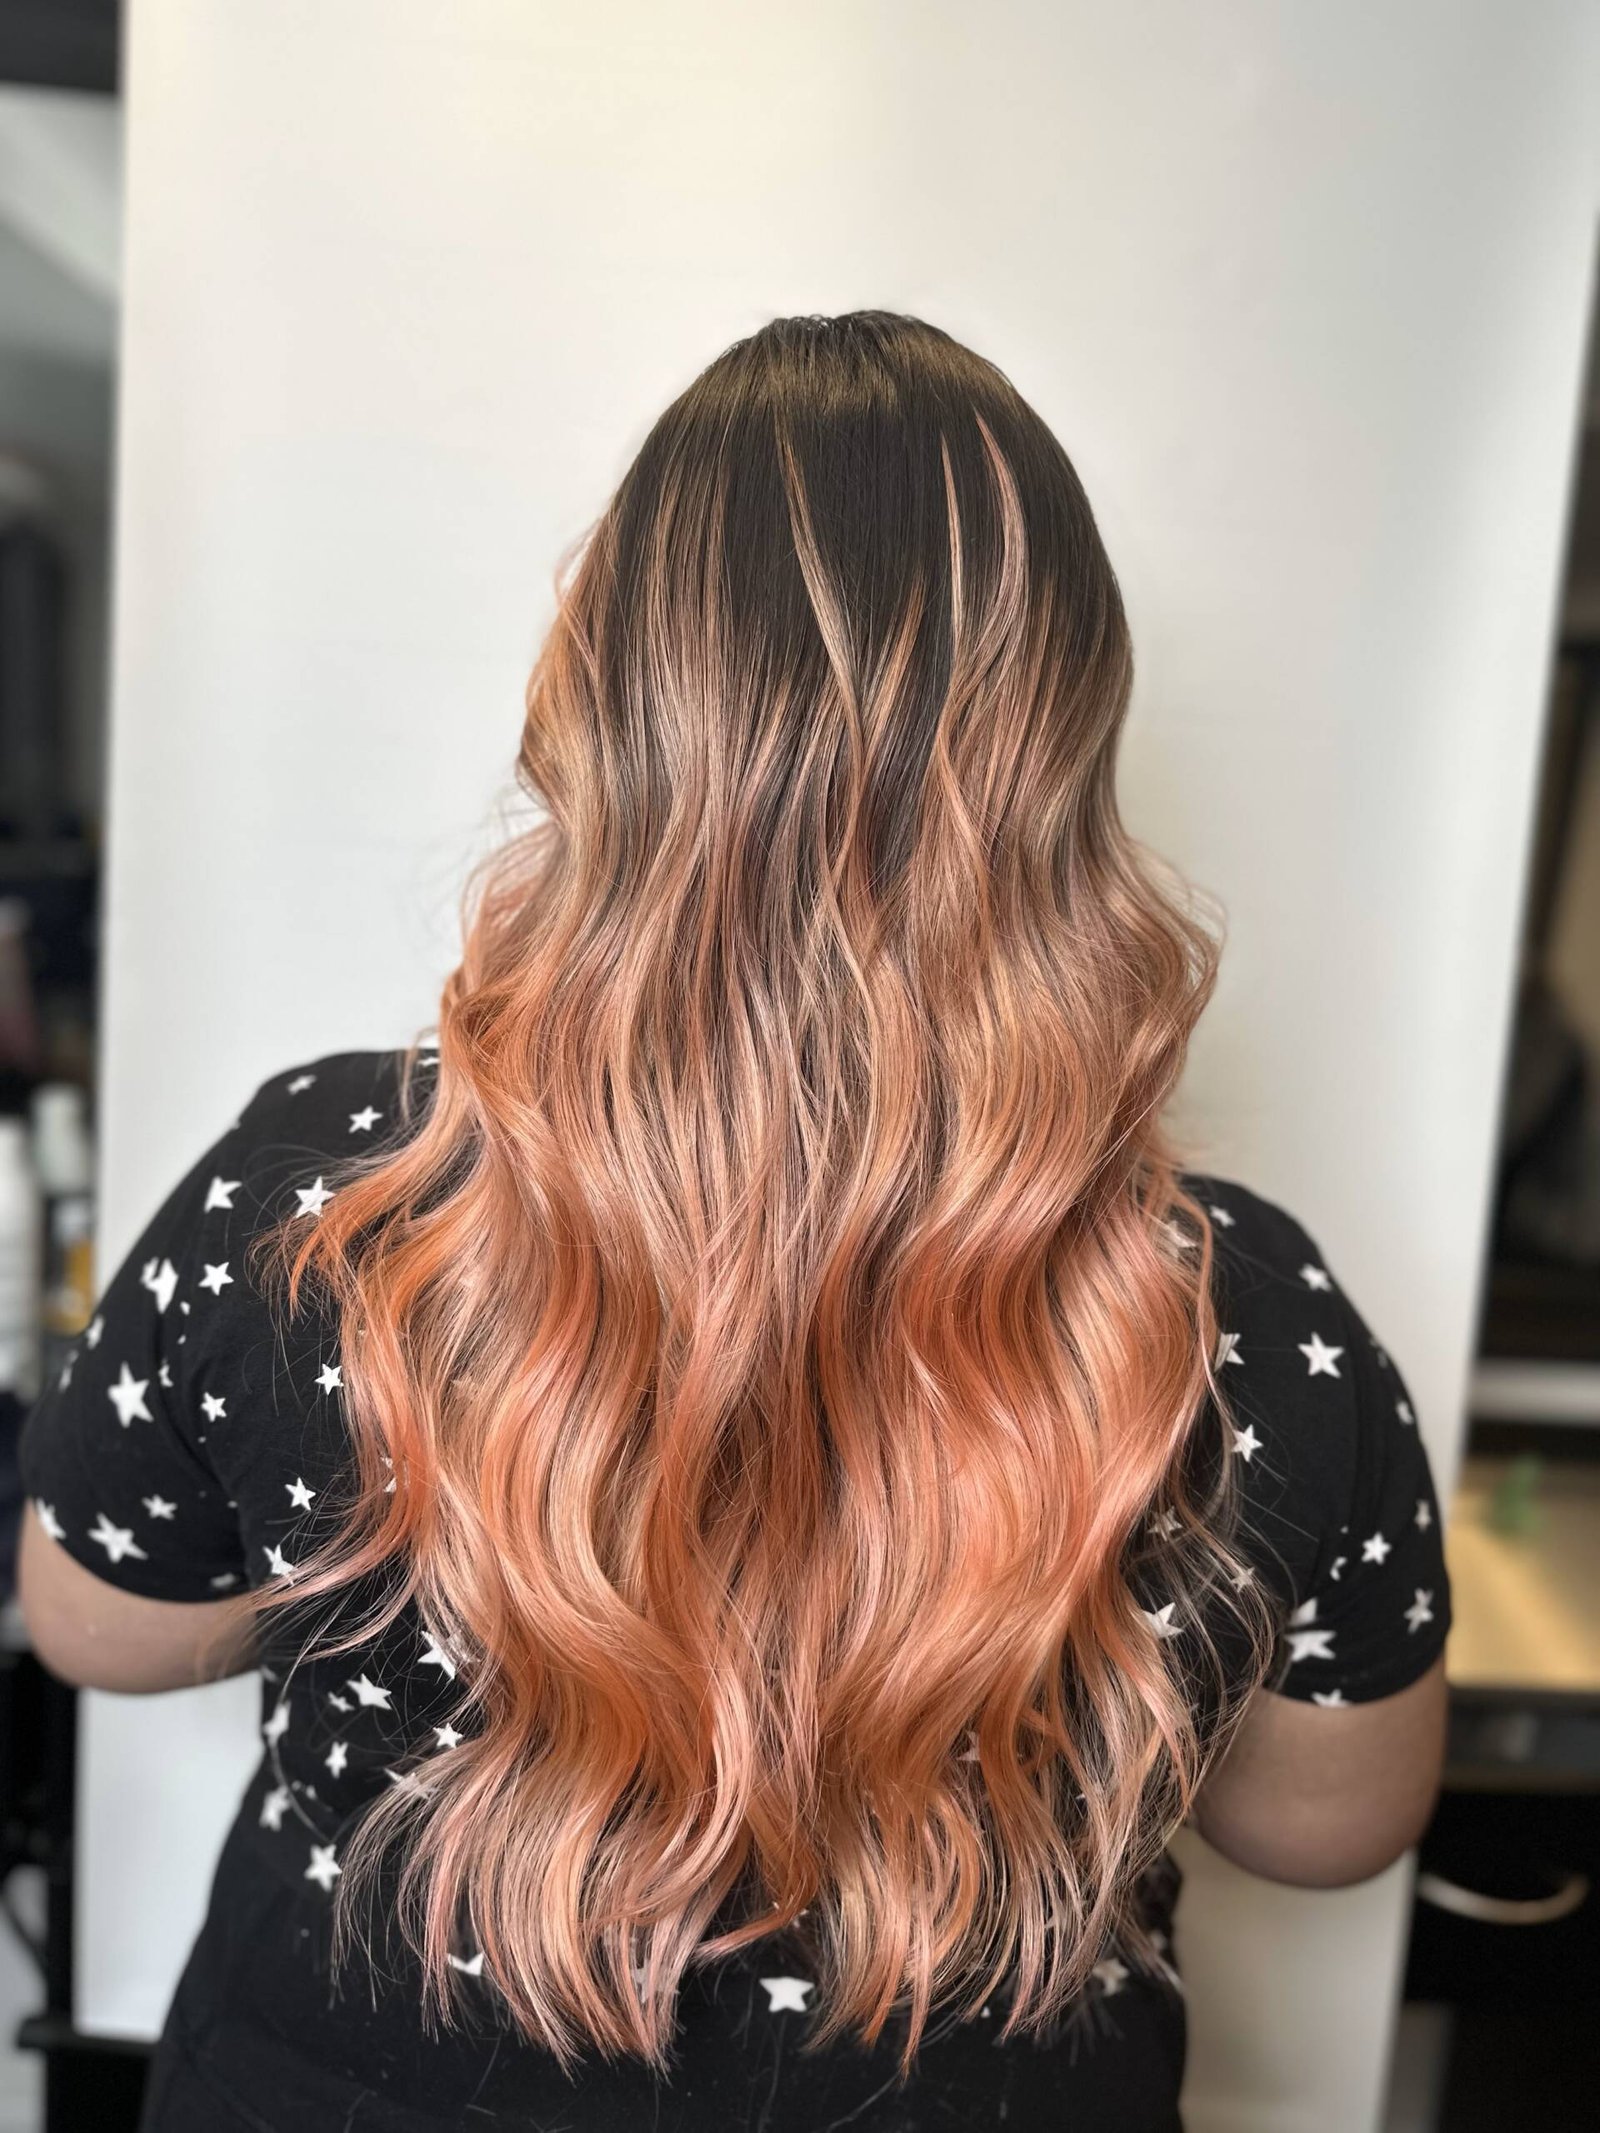 A woman with long flowing hair in a rose gold hair ombre, transitioning from deep red at the roots to vibrant pink and finally into gold at the ends.